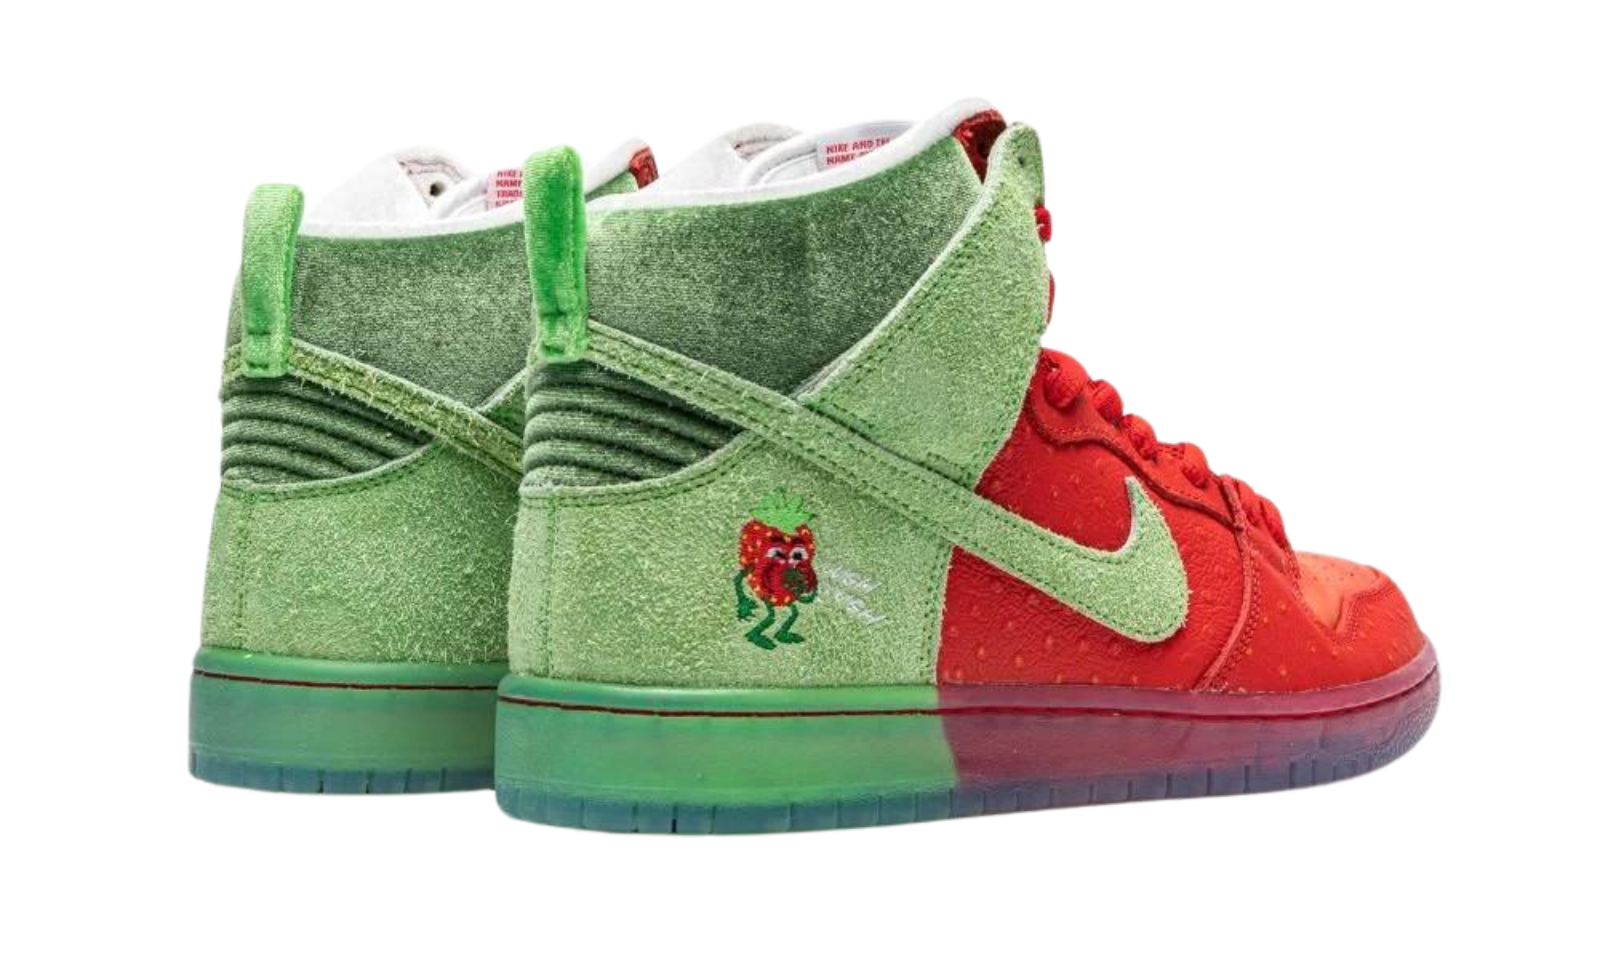 Nike Dunk High Strawberry Cough